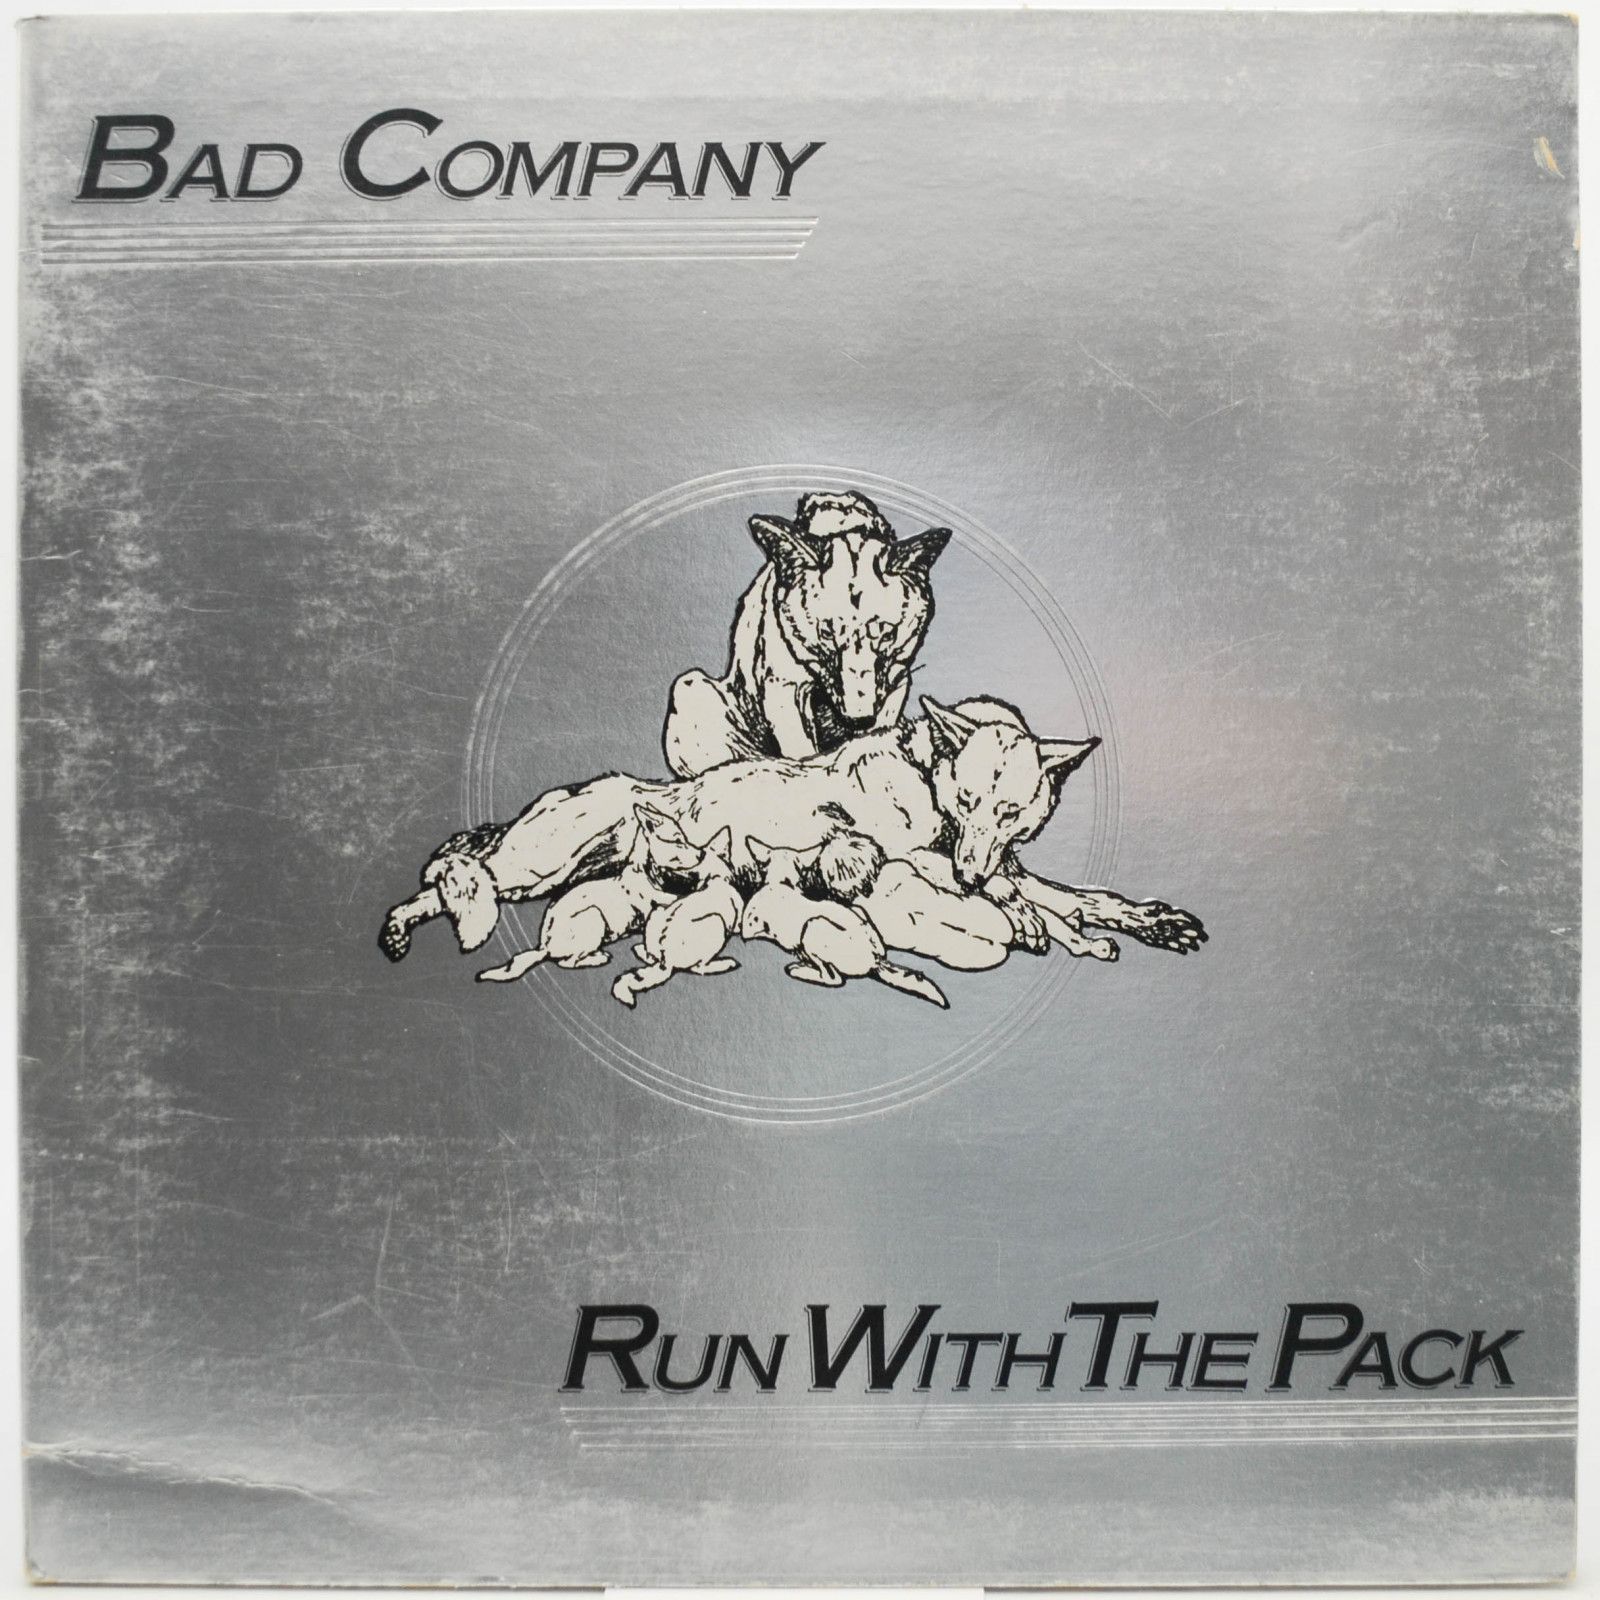 Bad Company — Run With The Pack, 1976